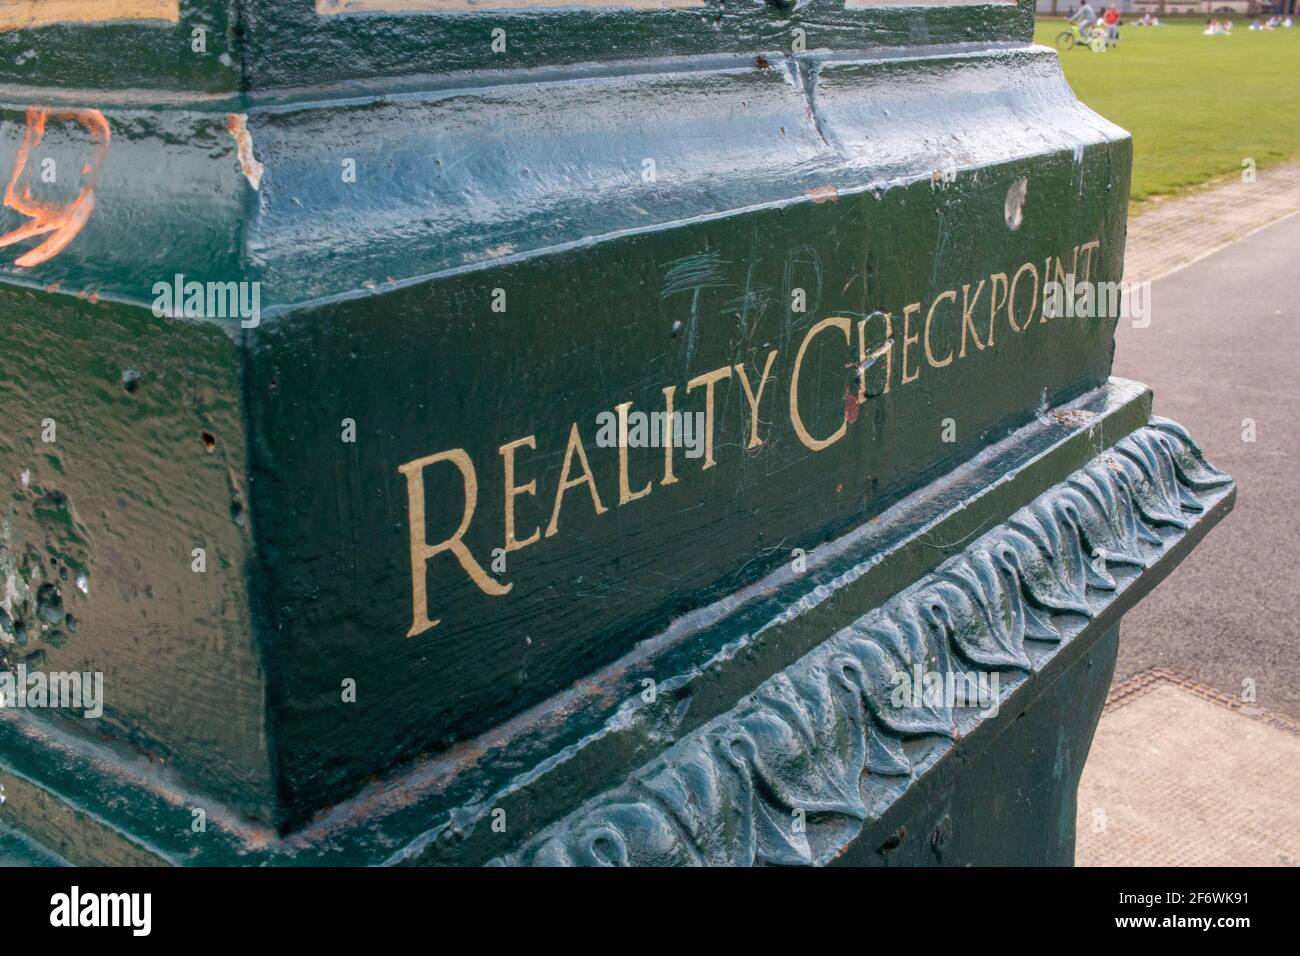 Reality Checkpoint sign engraved on the central cast iron lamp post on Parker's Piece, Cambridge, UK.  Gold lettering on a green metal background. Stock Photo